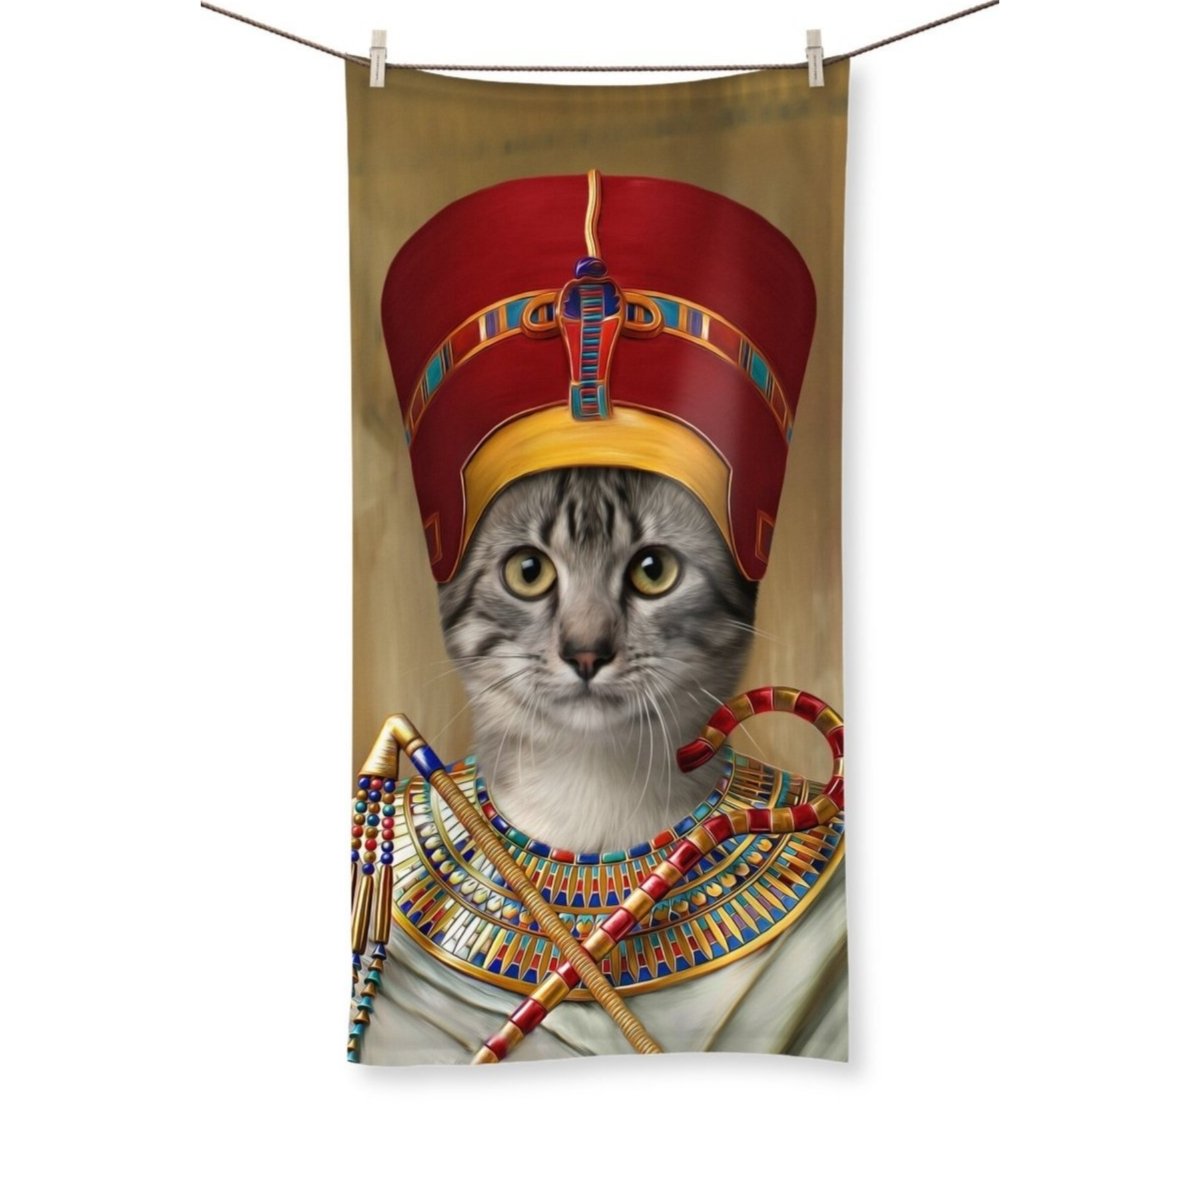 The Egyptian Queen: Custom Pet Towel - Paw & Glory - #pet portraits# - #dog portraits# - #pet portraits uk#Paw & Glory, paw and glory, dog canvas art, dog drawing from photo, hogwarts dog houses, dog canvas art, drawing dog portraits, animal portrait artists, pet portraits,custom pet portrait Towel